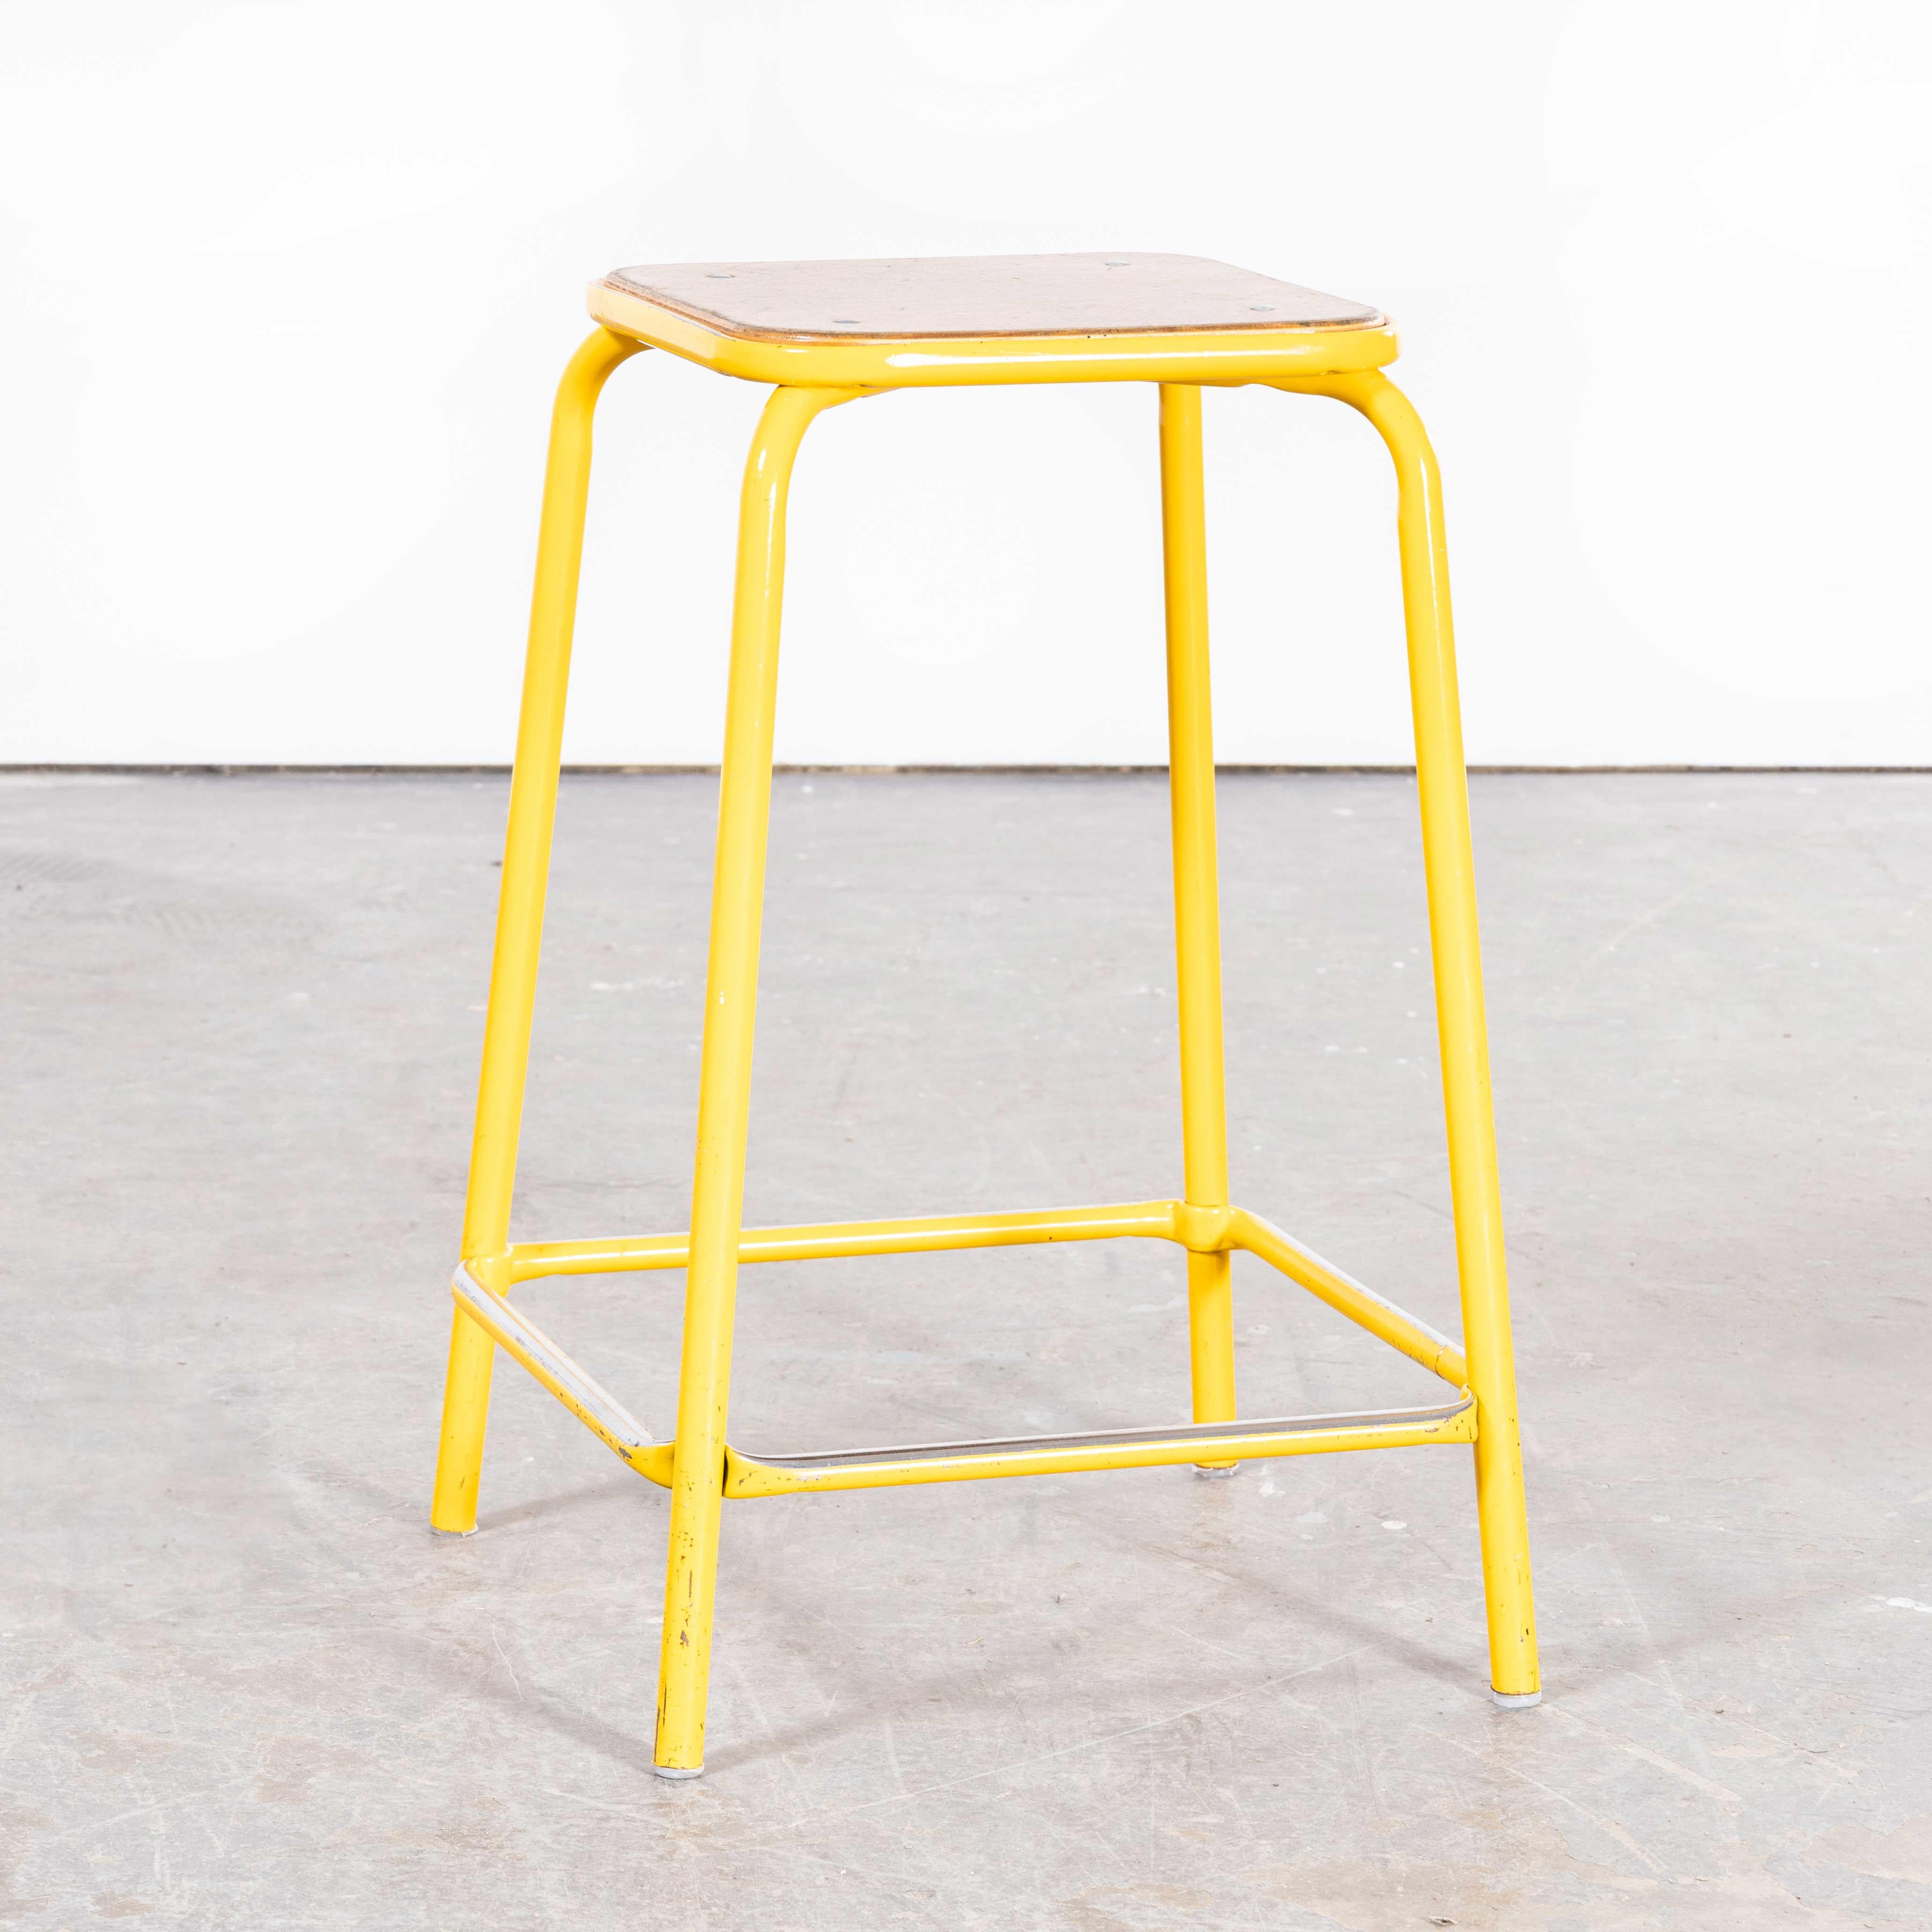 1960’s original Mullca French high stools – yellow – good quantities available
1960’s original Mullca French high stools – yellow – good quantities available. One of our most favourite stools, the laboratory high stools made by Mullca, with the